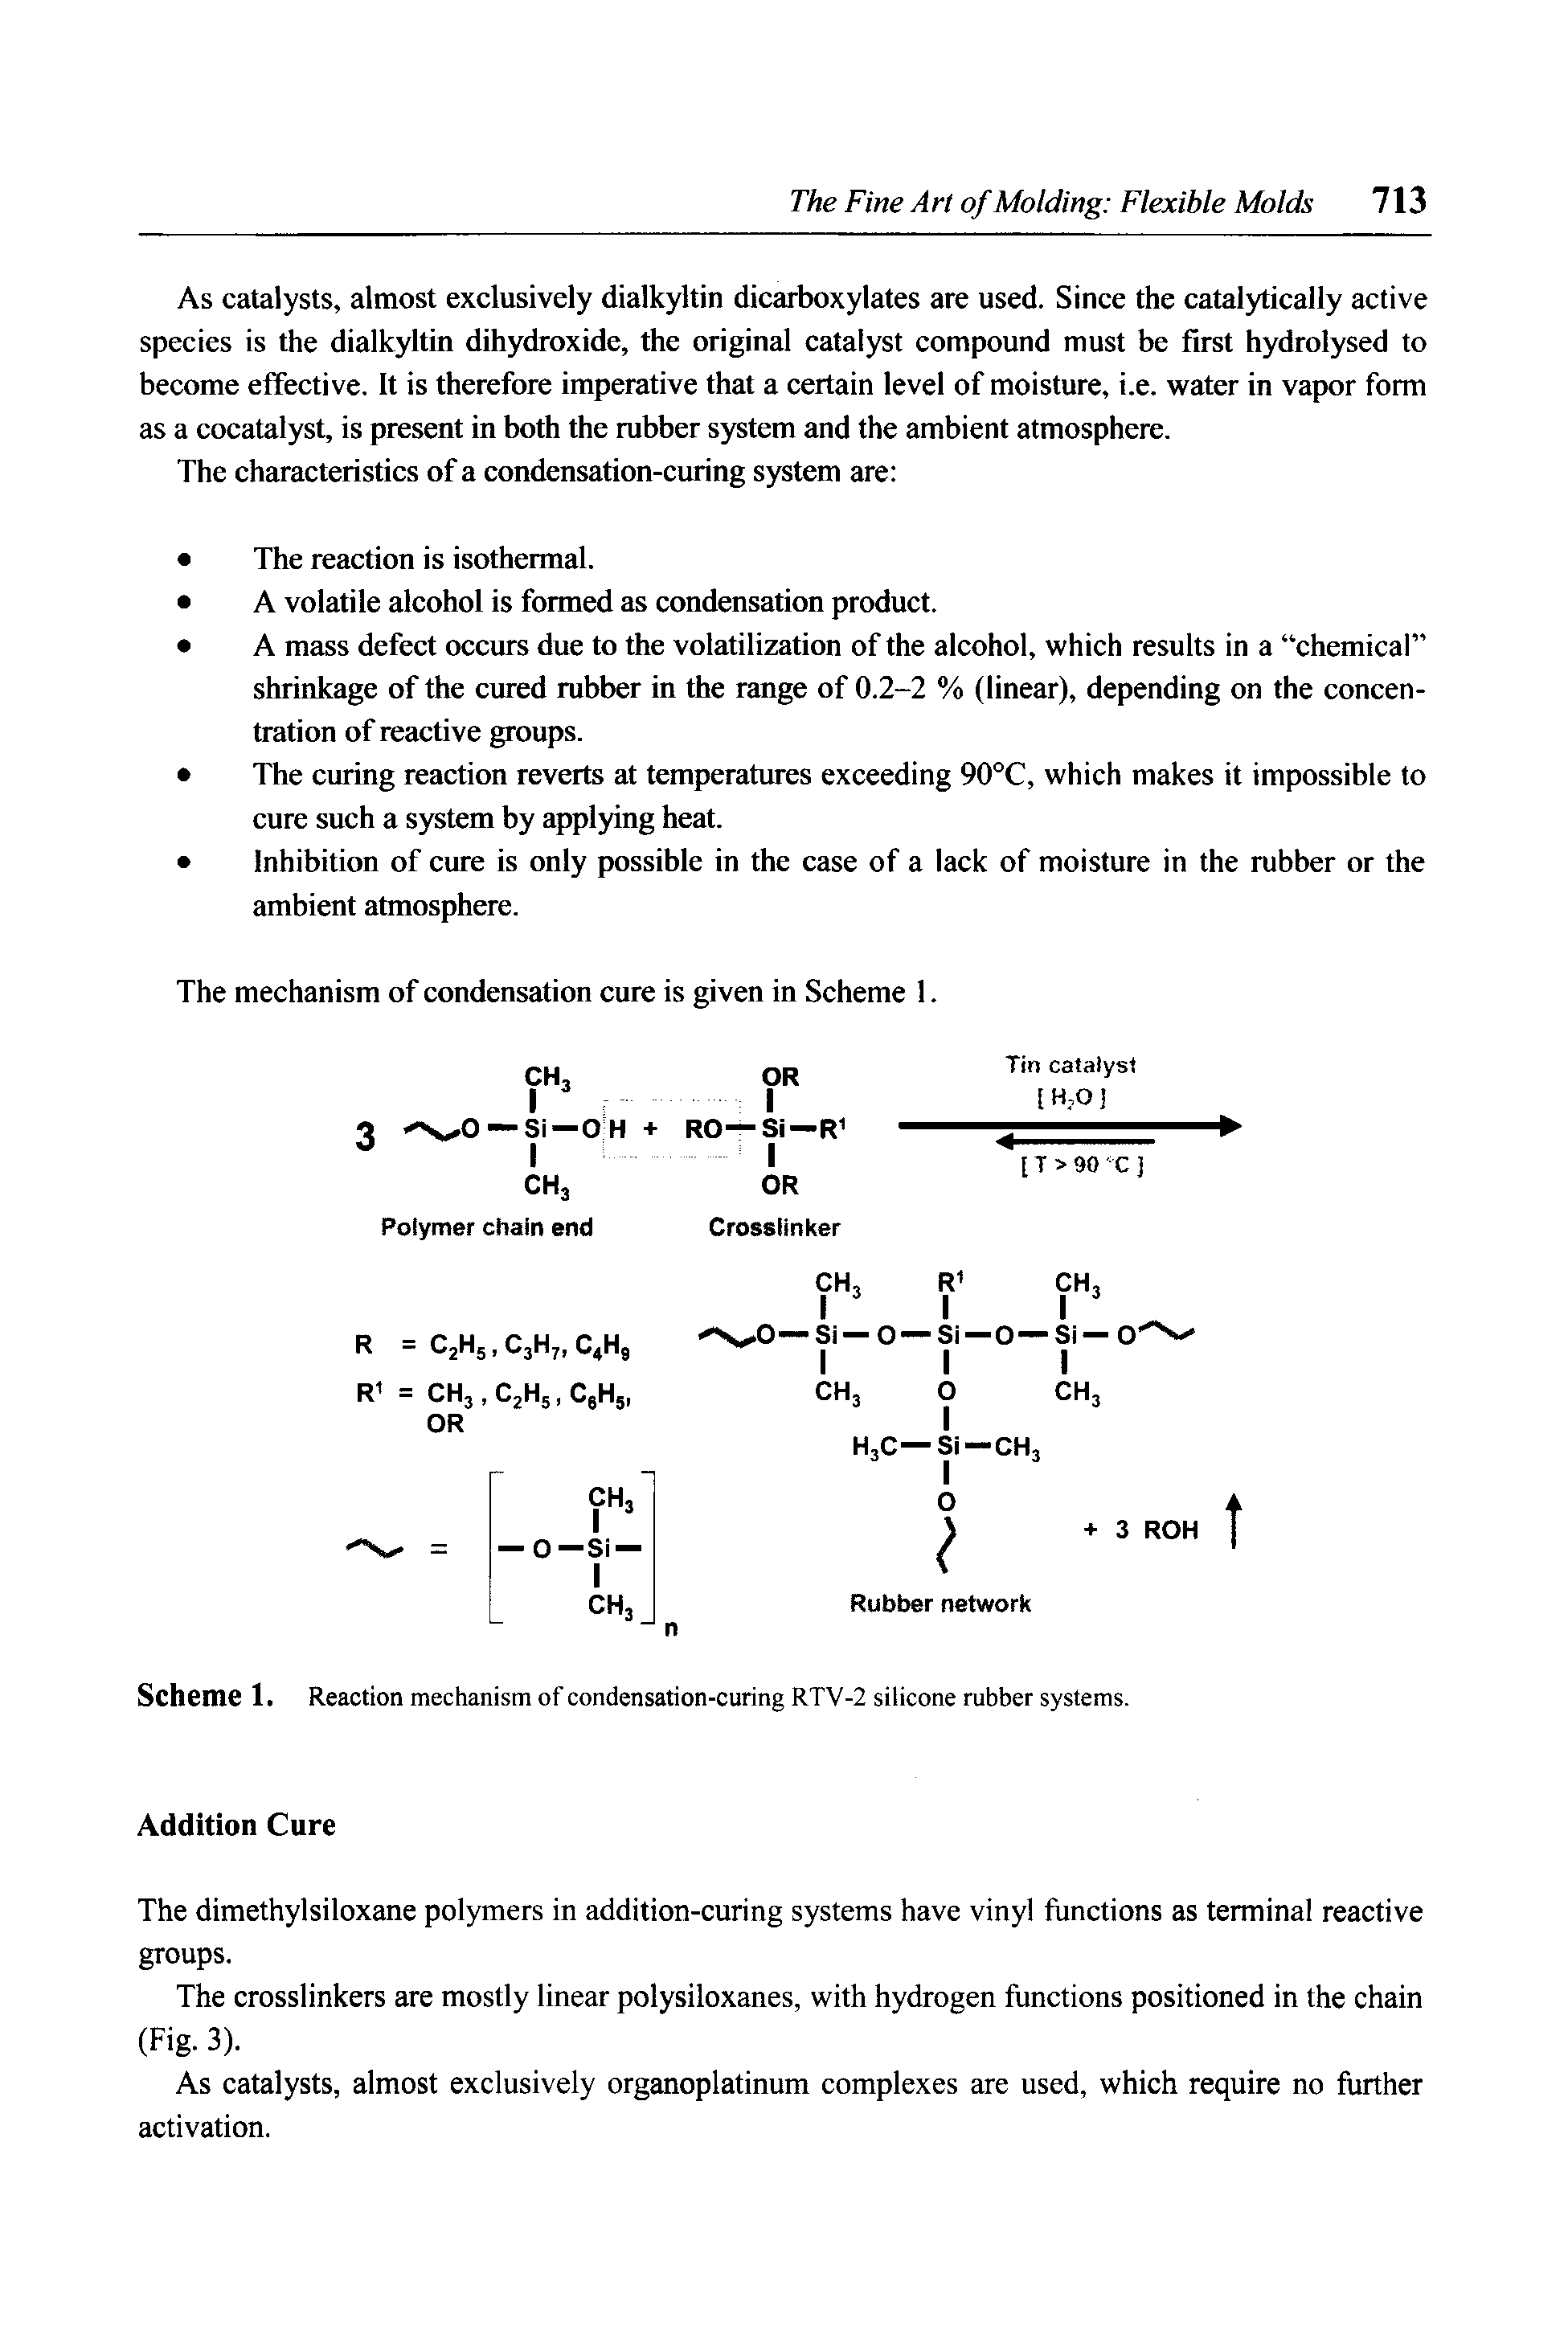 Scheme 1. Reaction mechanism of condensation-curing RTV-2 silicone rubber systems.